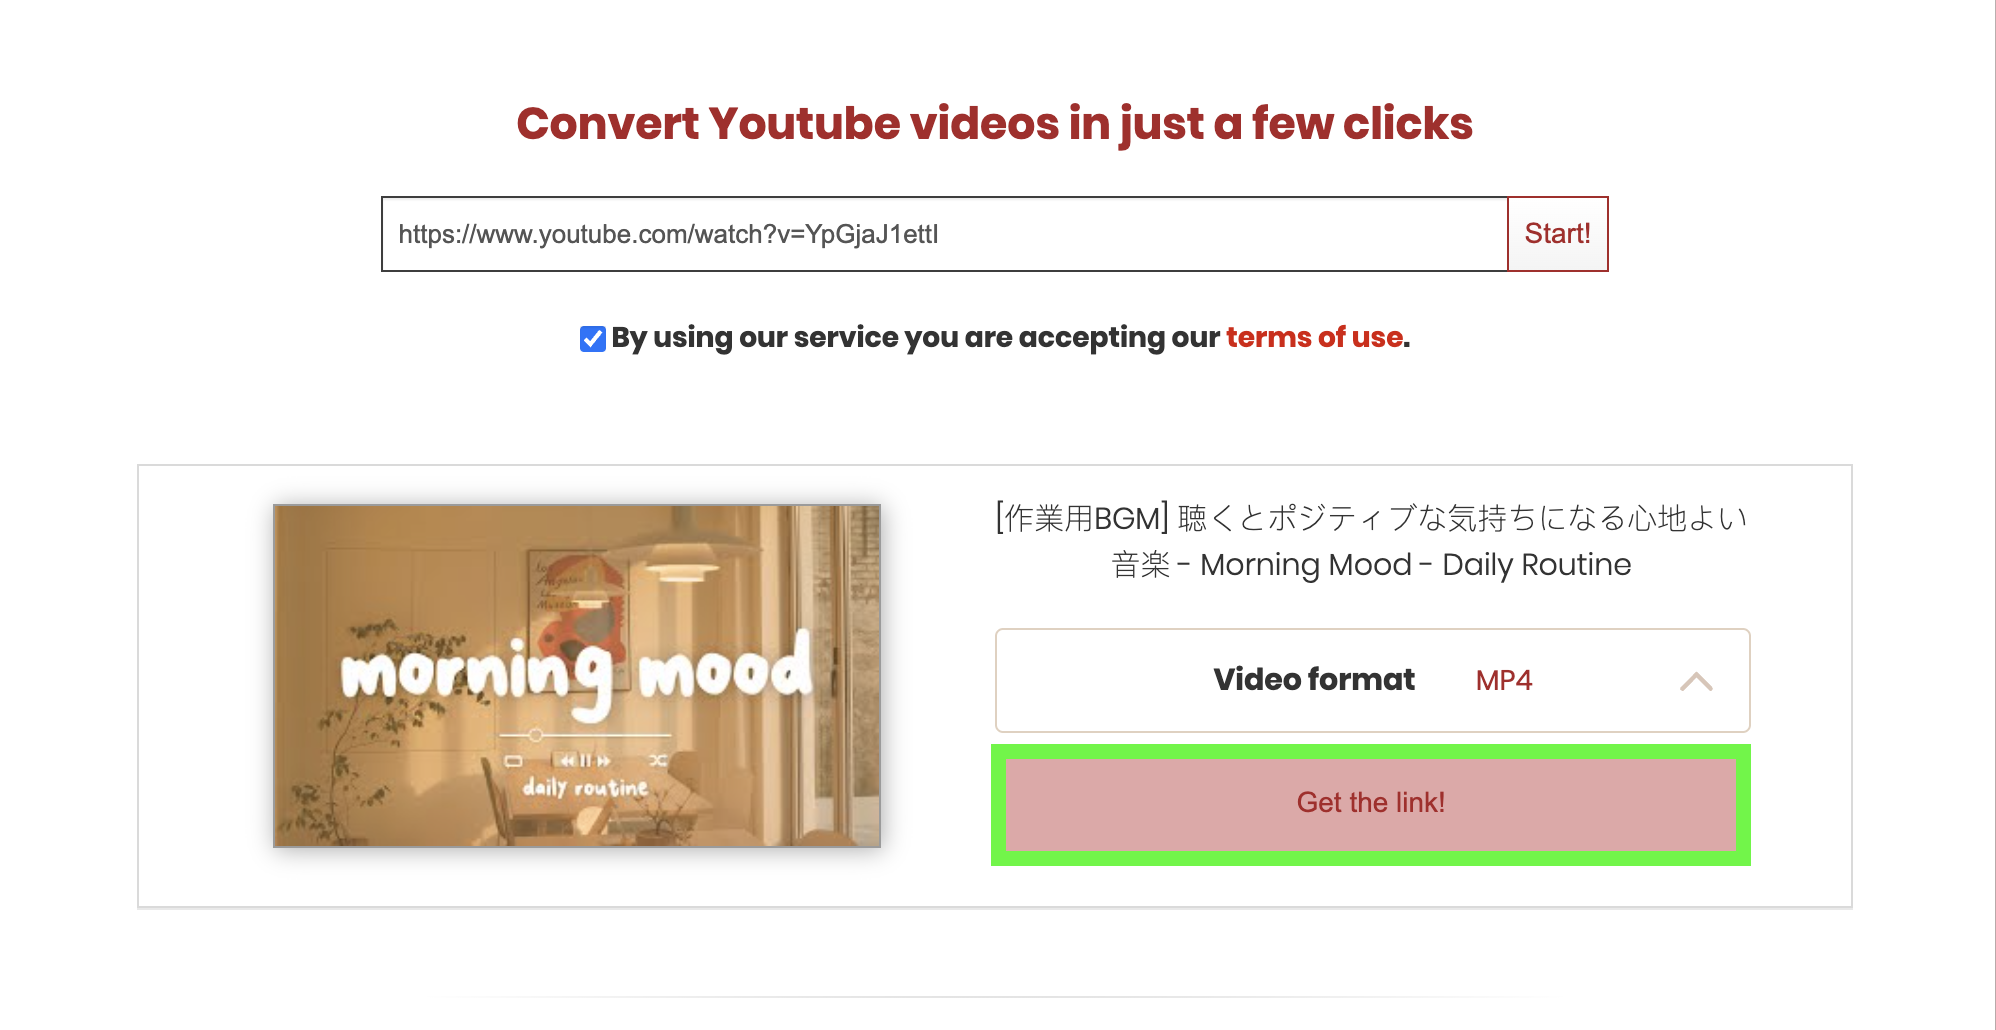 Step 3: Select your video or audio format and click on "Get the Link"